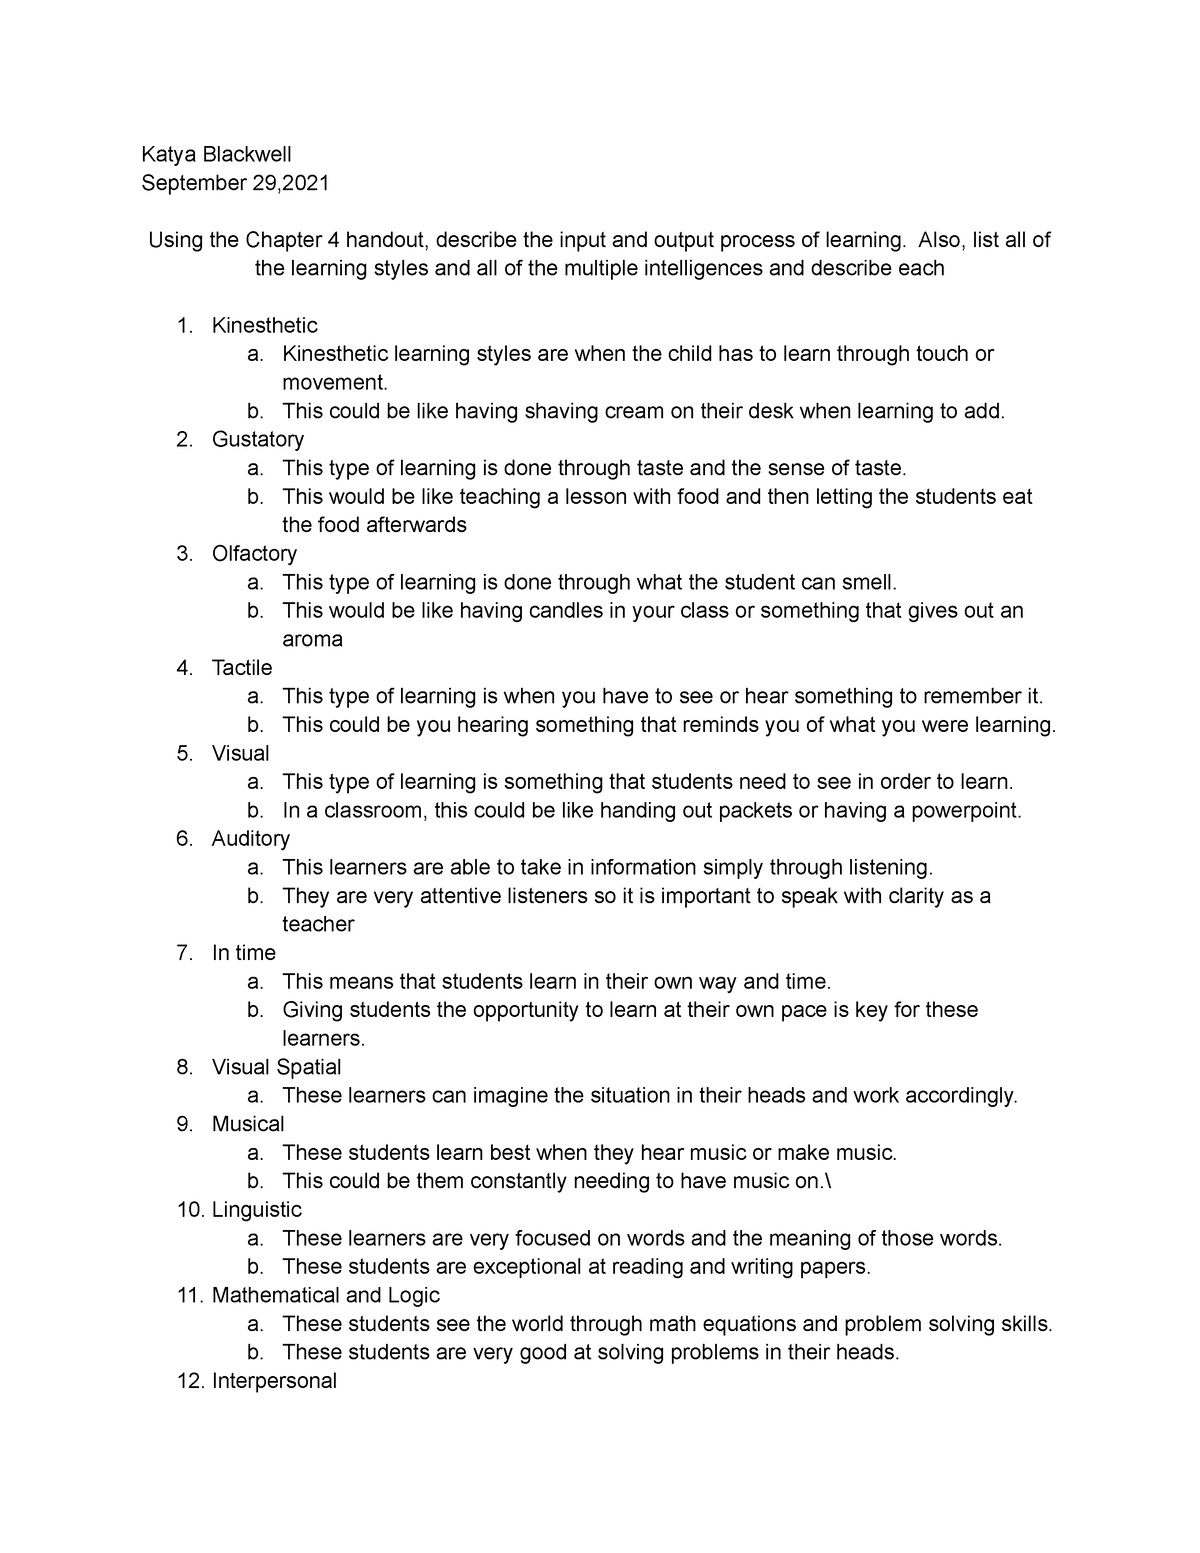 Chapter 4 - Study notes - Katya Blackwell September 29, Using the ...